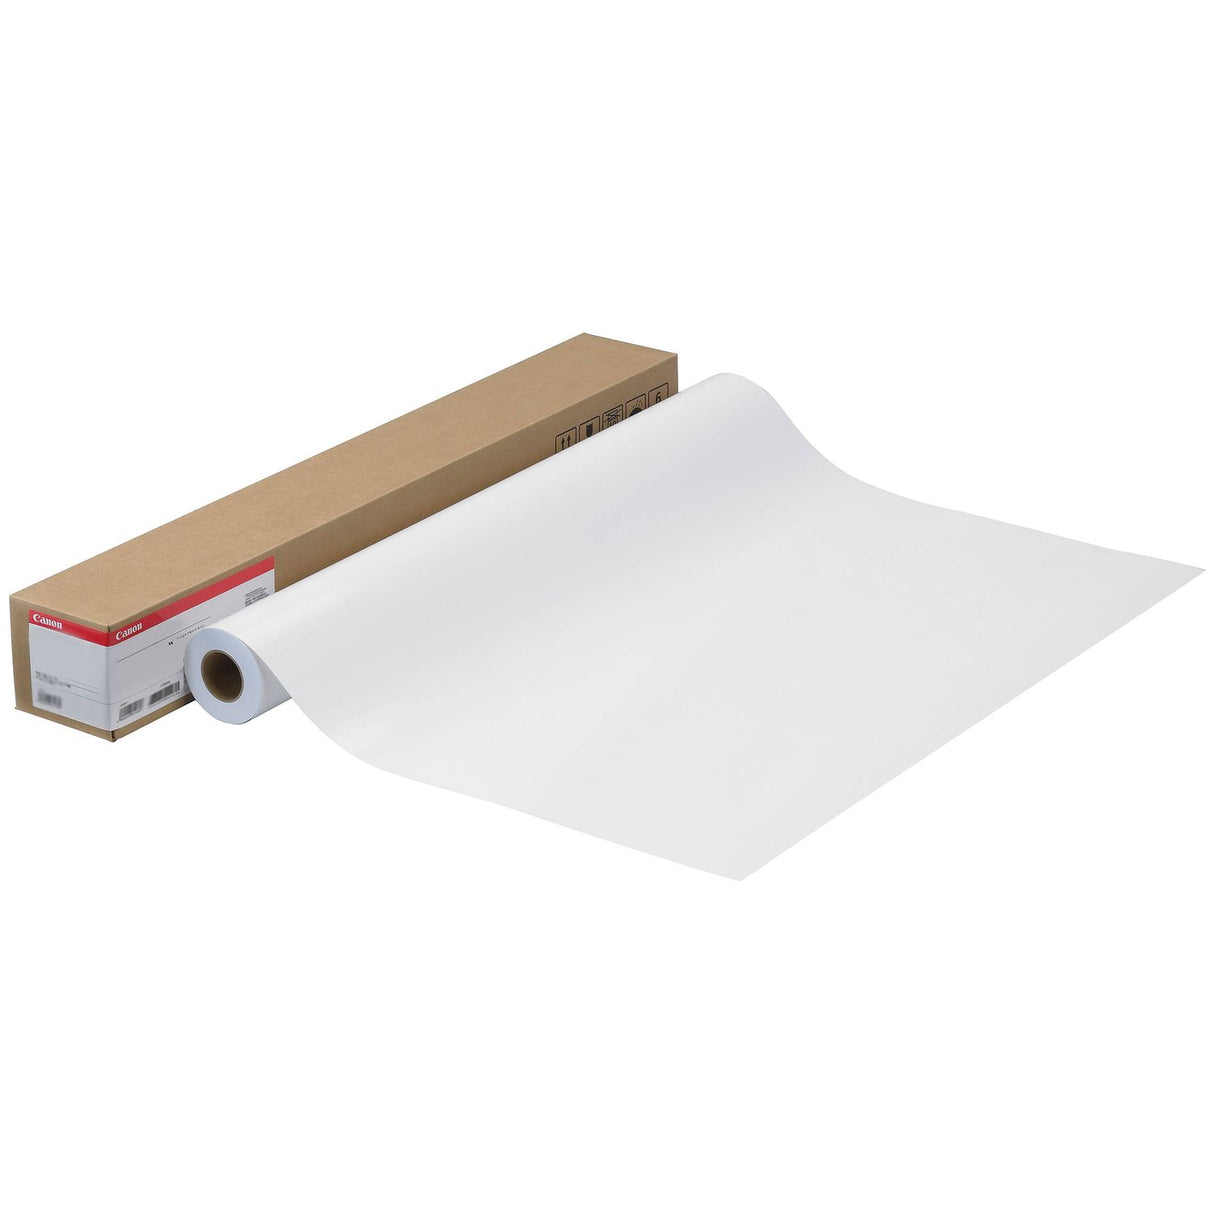 Canon Glossy Photo Paper - 42" x 100 ft - 200 g/m² Grammage - Glossy - Quick Drying - Bright White